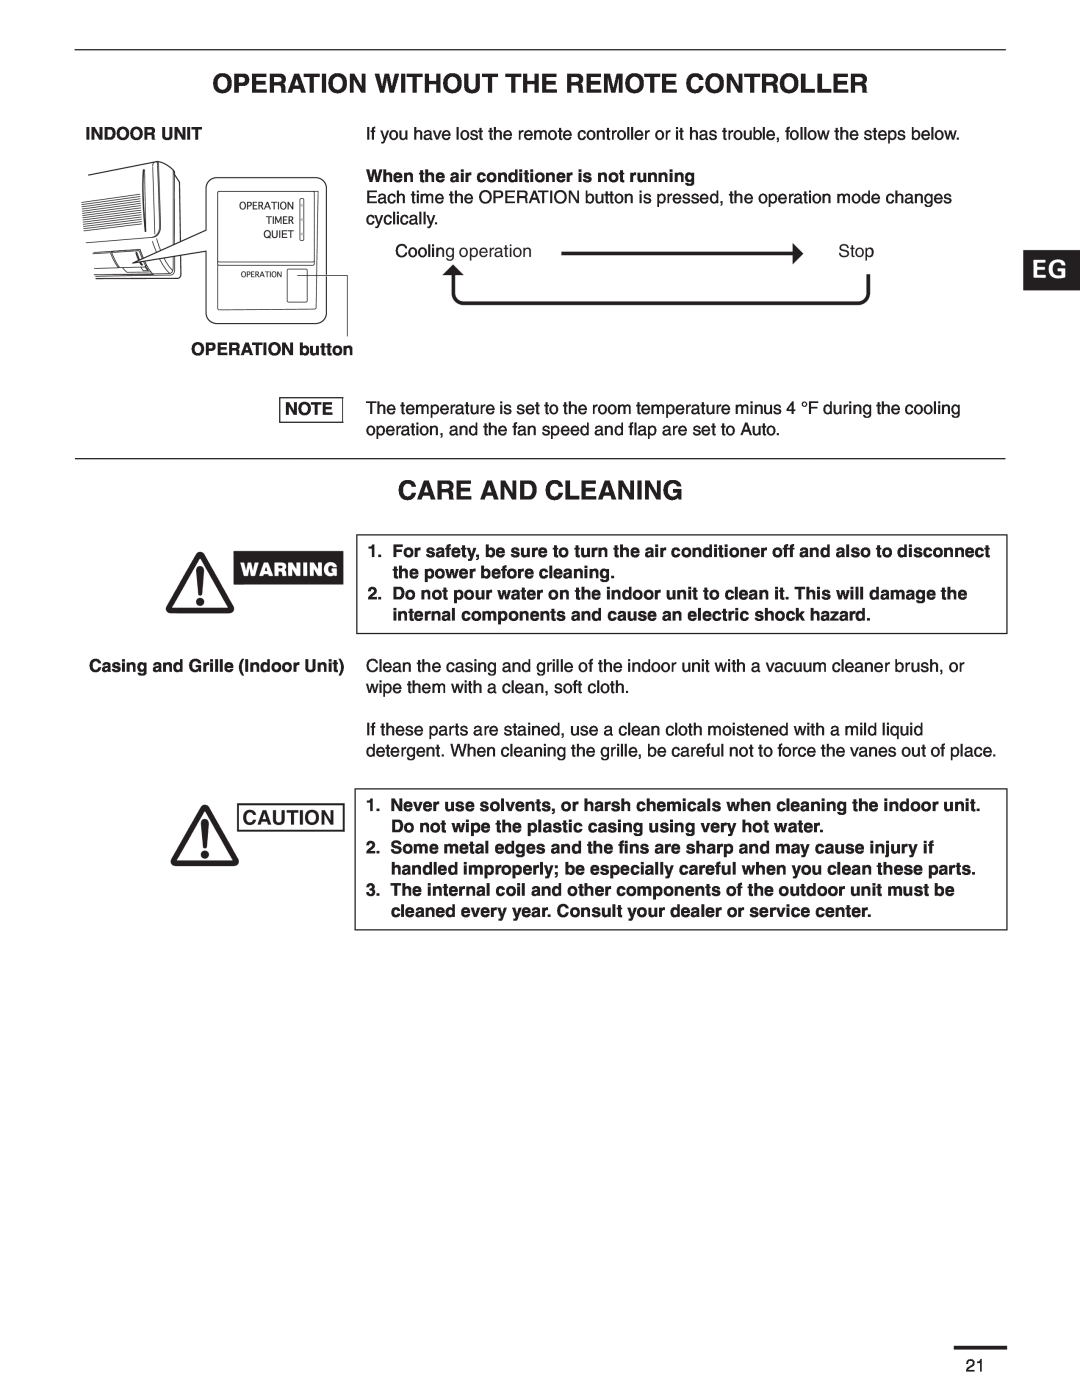 Panasonic CS-MKS18NKU, CS-MKS24NKU, CS-MKS9NKU service manual Operation Without The Remote Controller, Care And Cleaning 